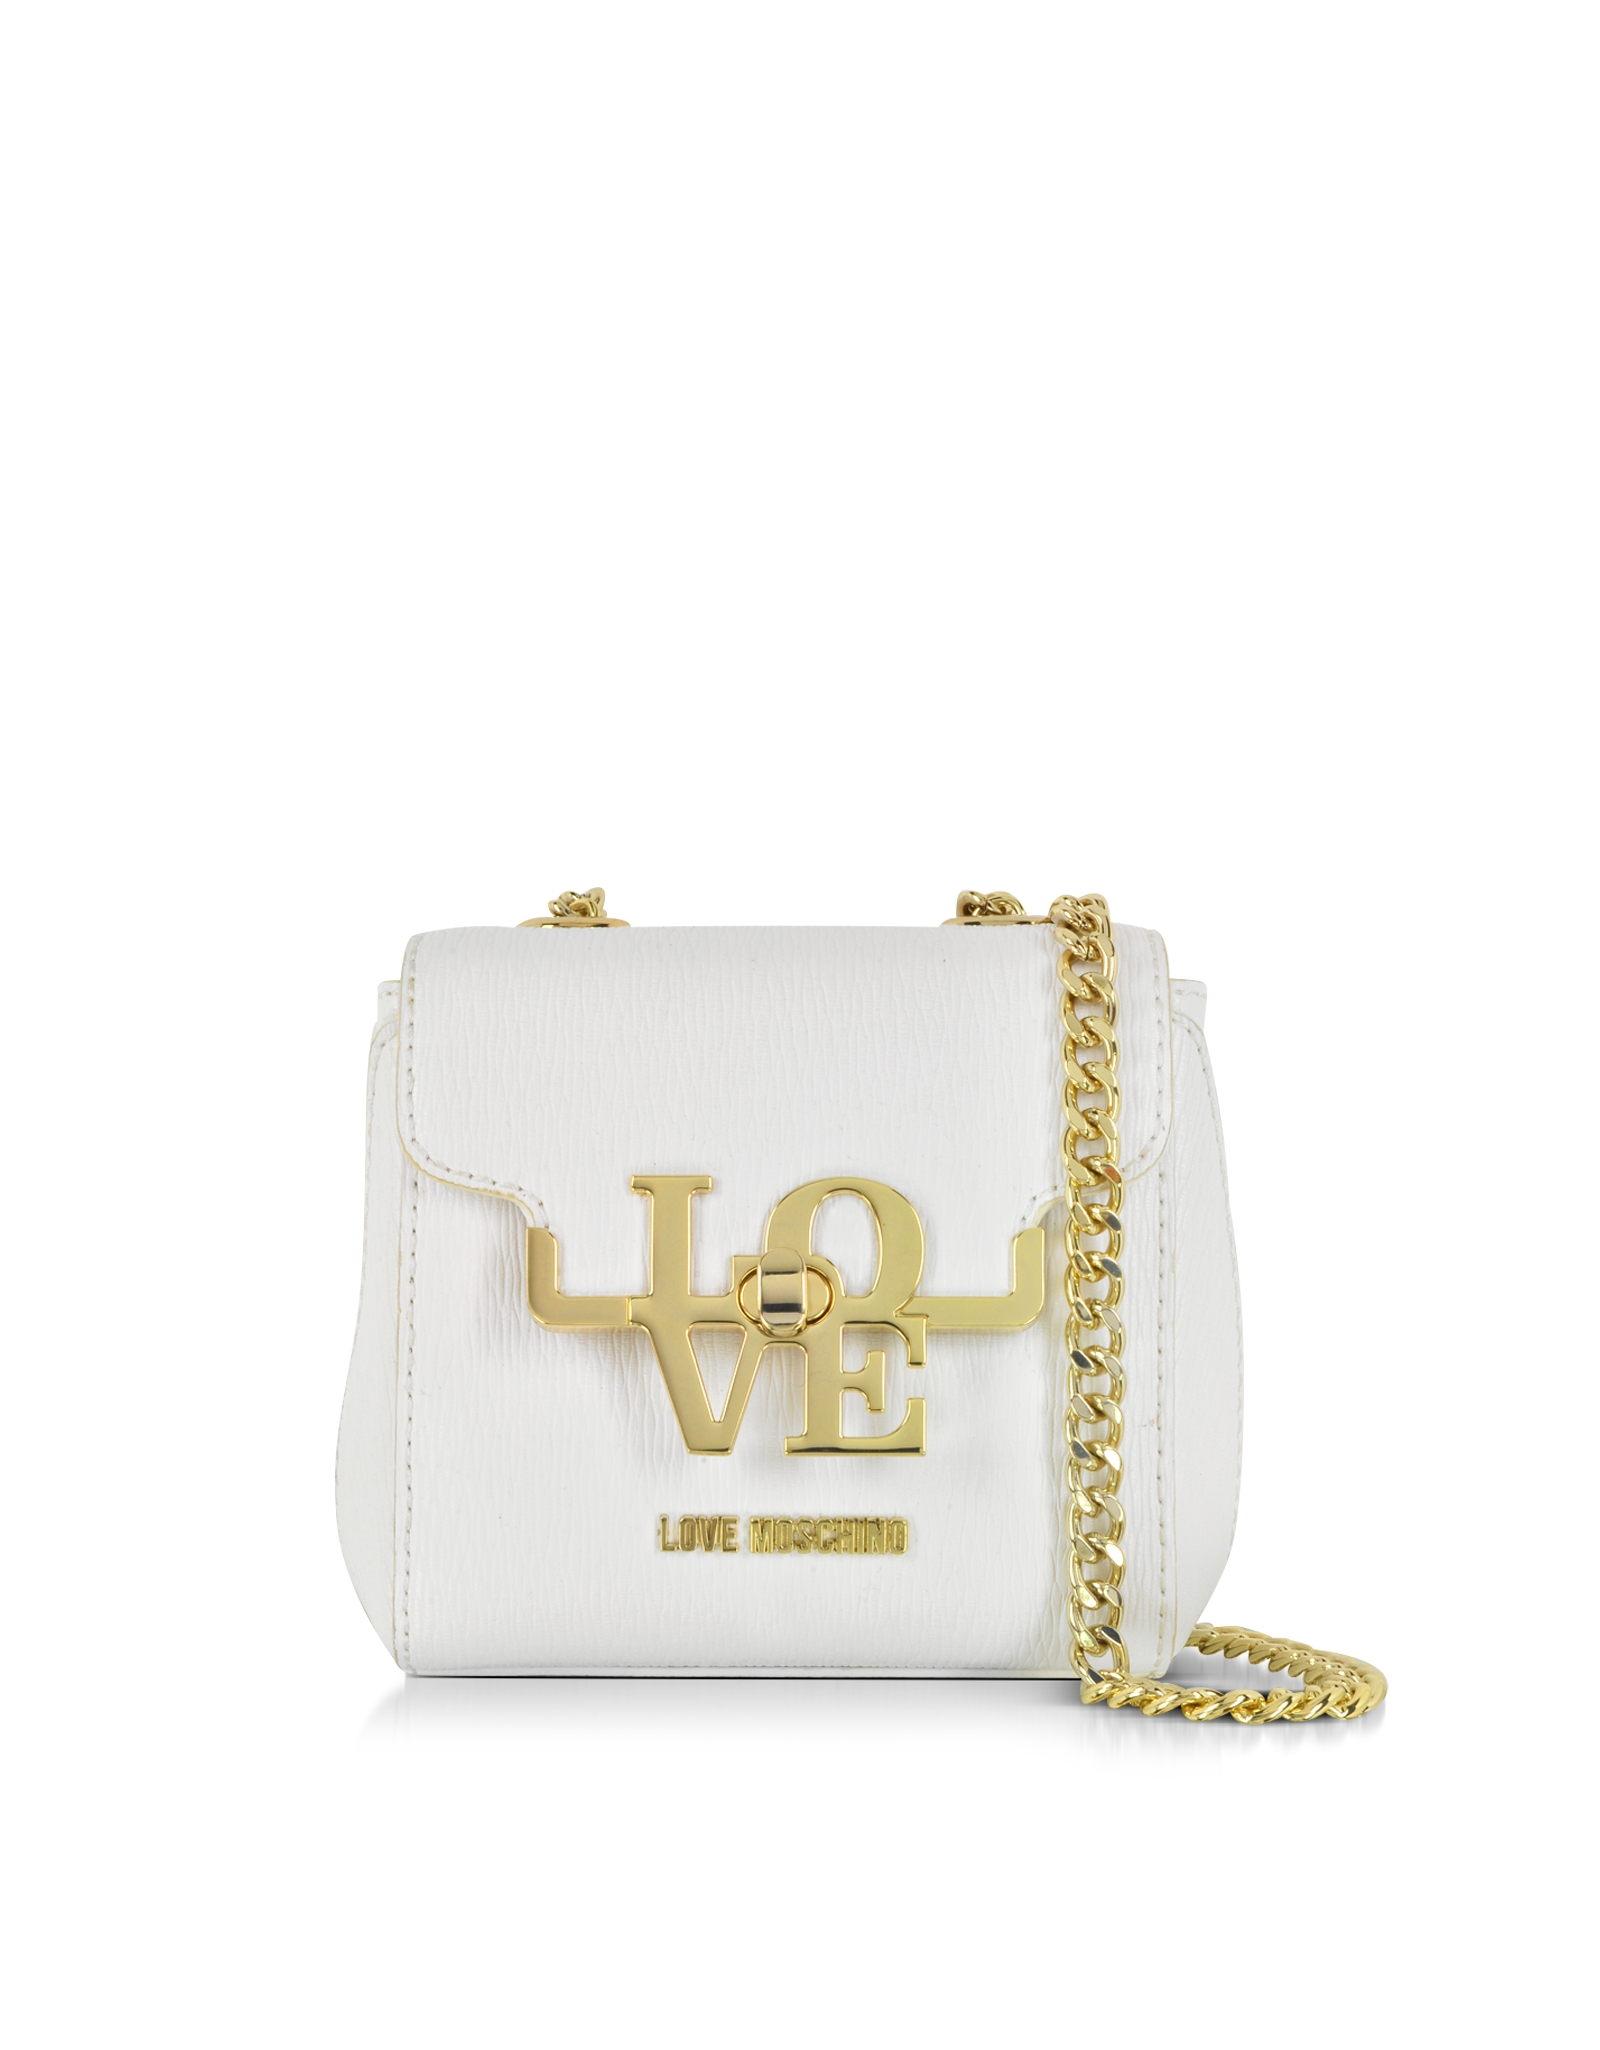 Lyst - Love Moschino White Eco Leather Crossbody Bag in White